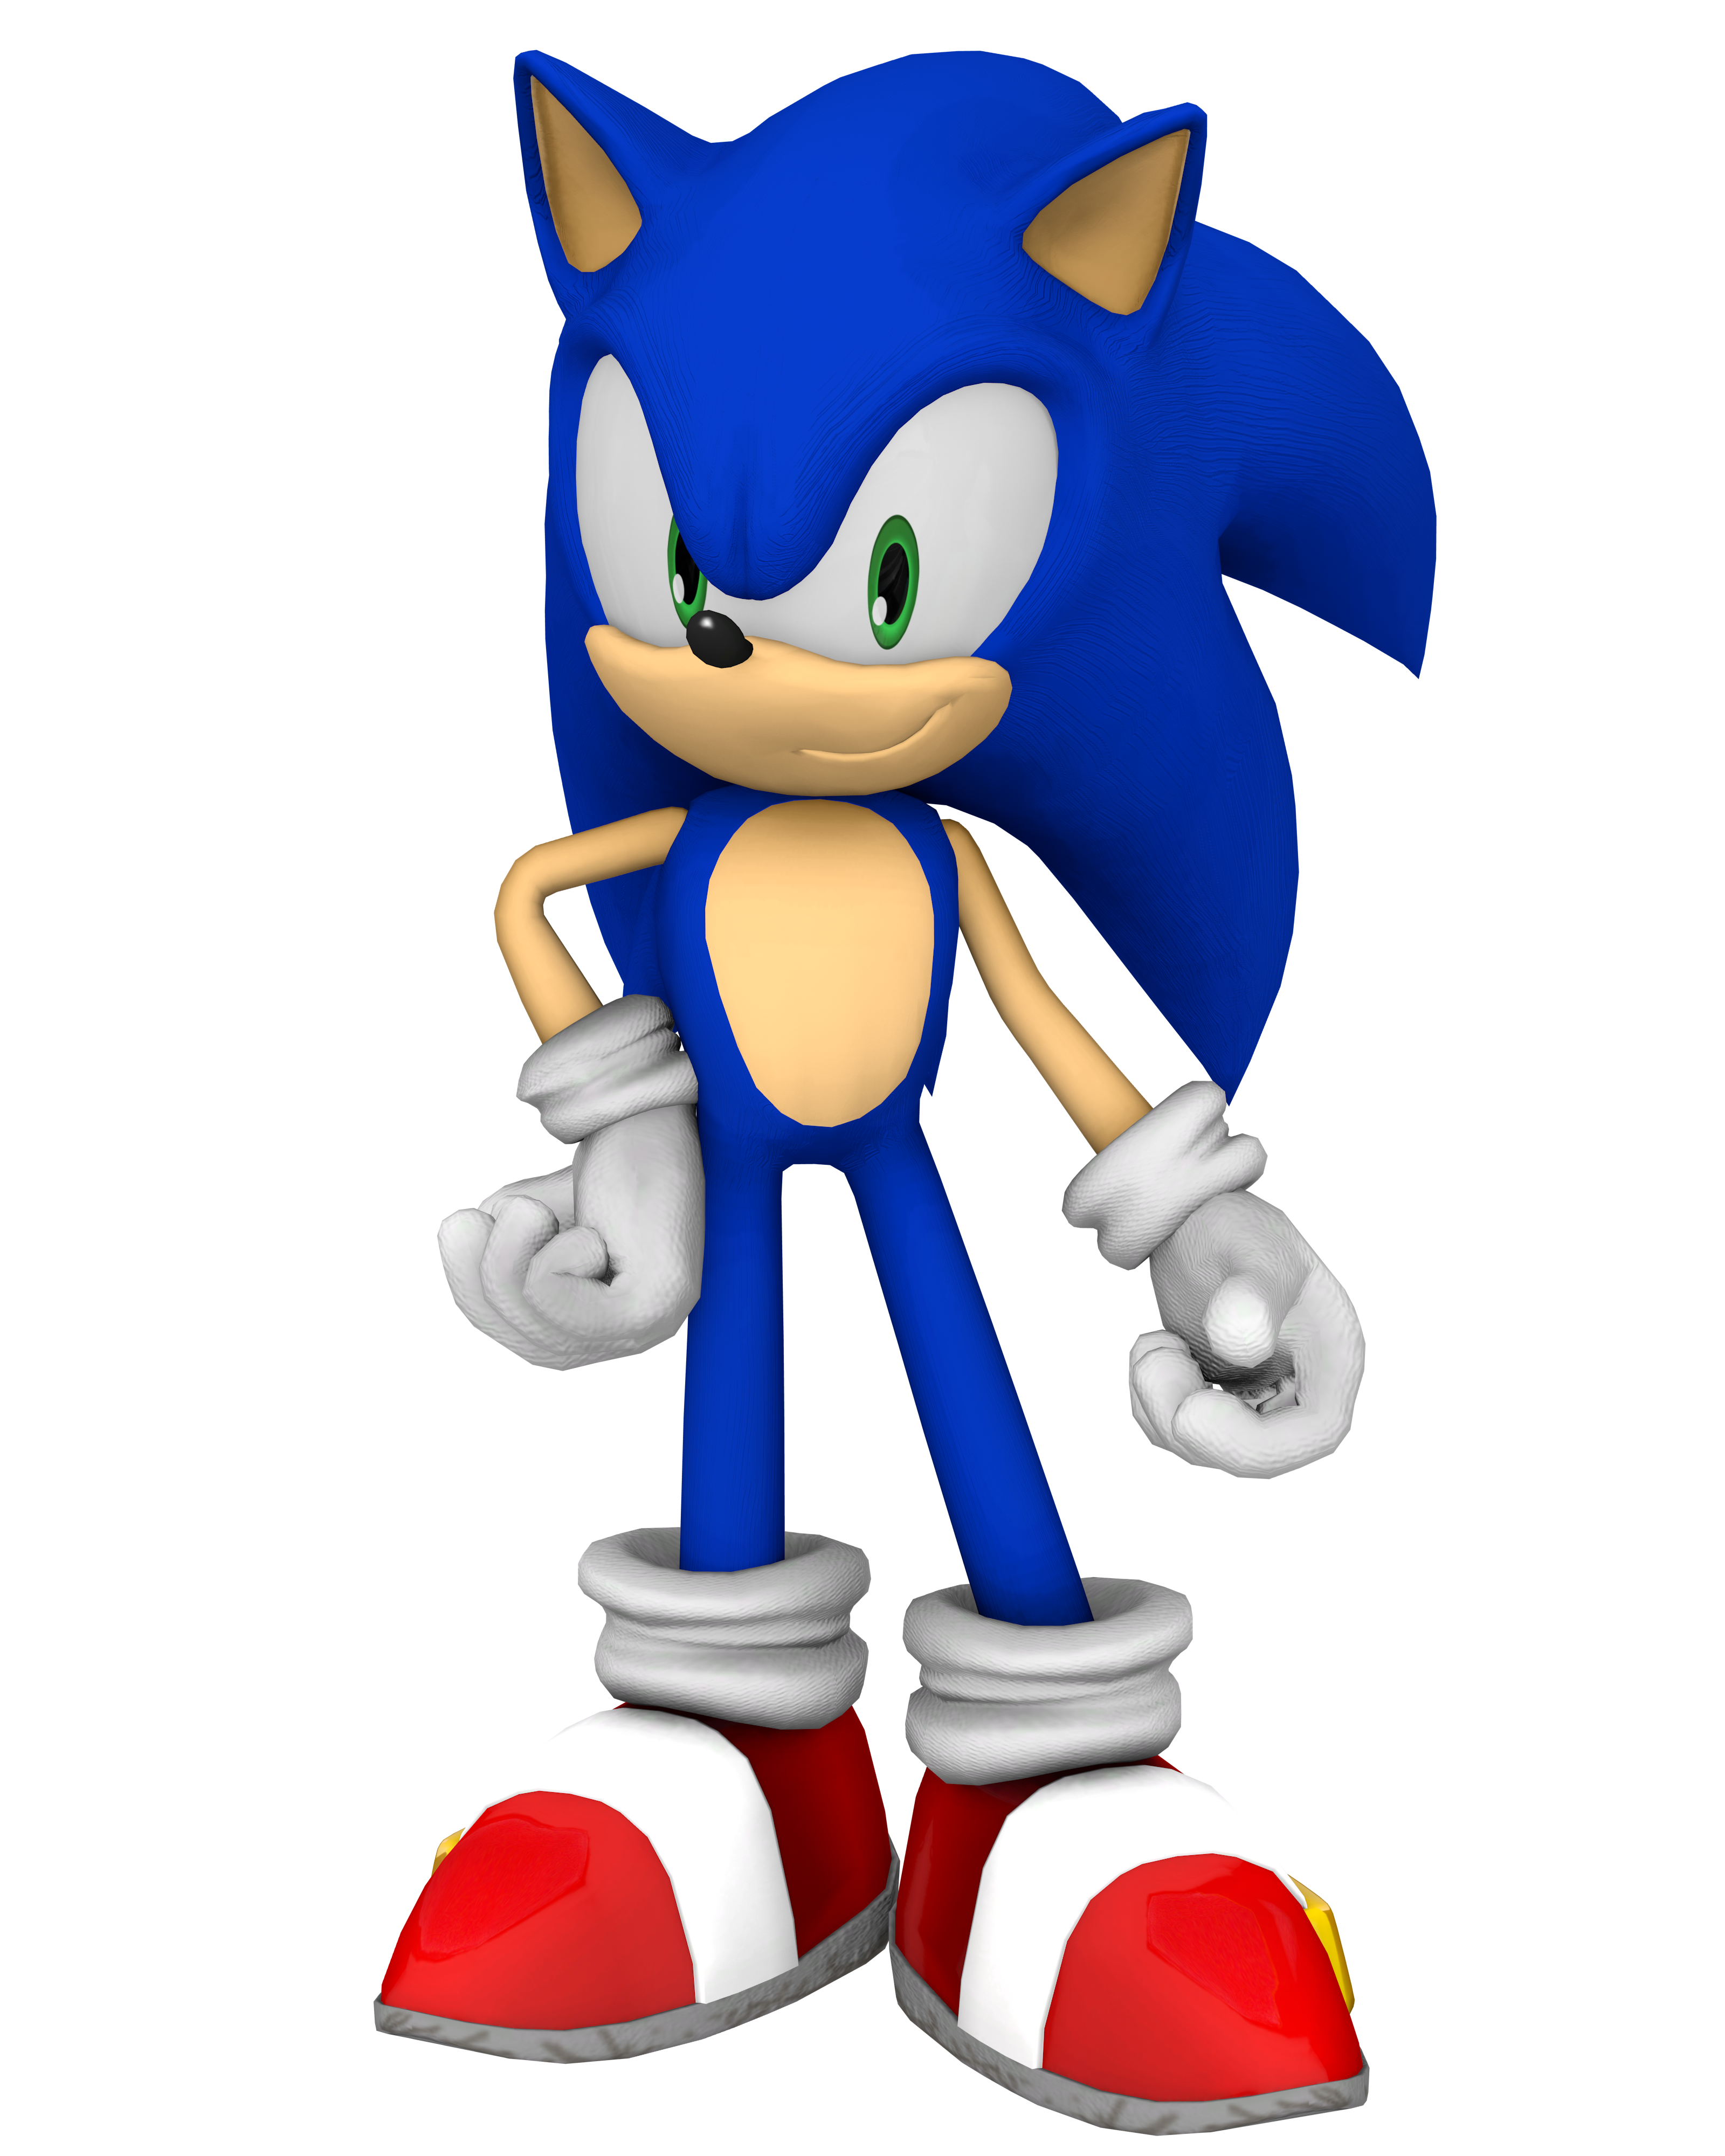 Classic Sonic (Revised) by Hydro-Plumber on DeviantArt